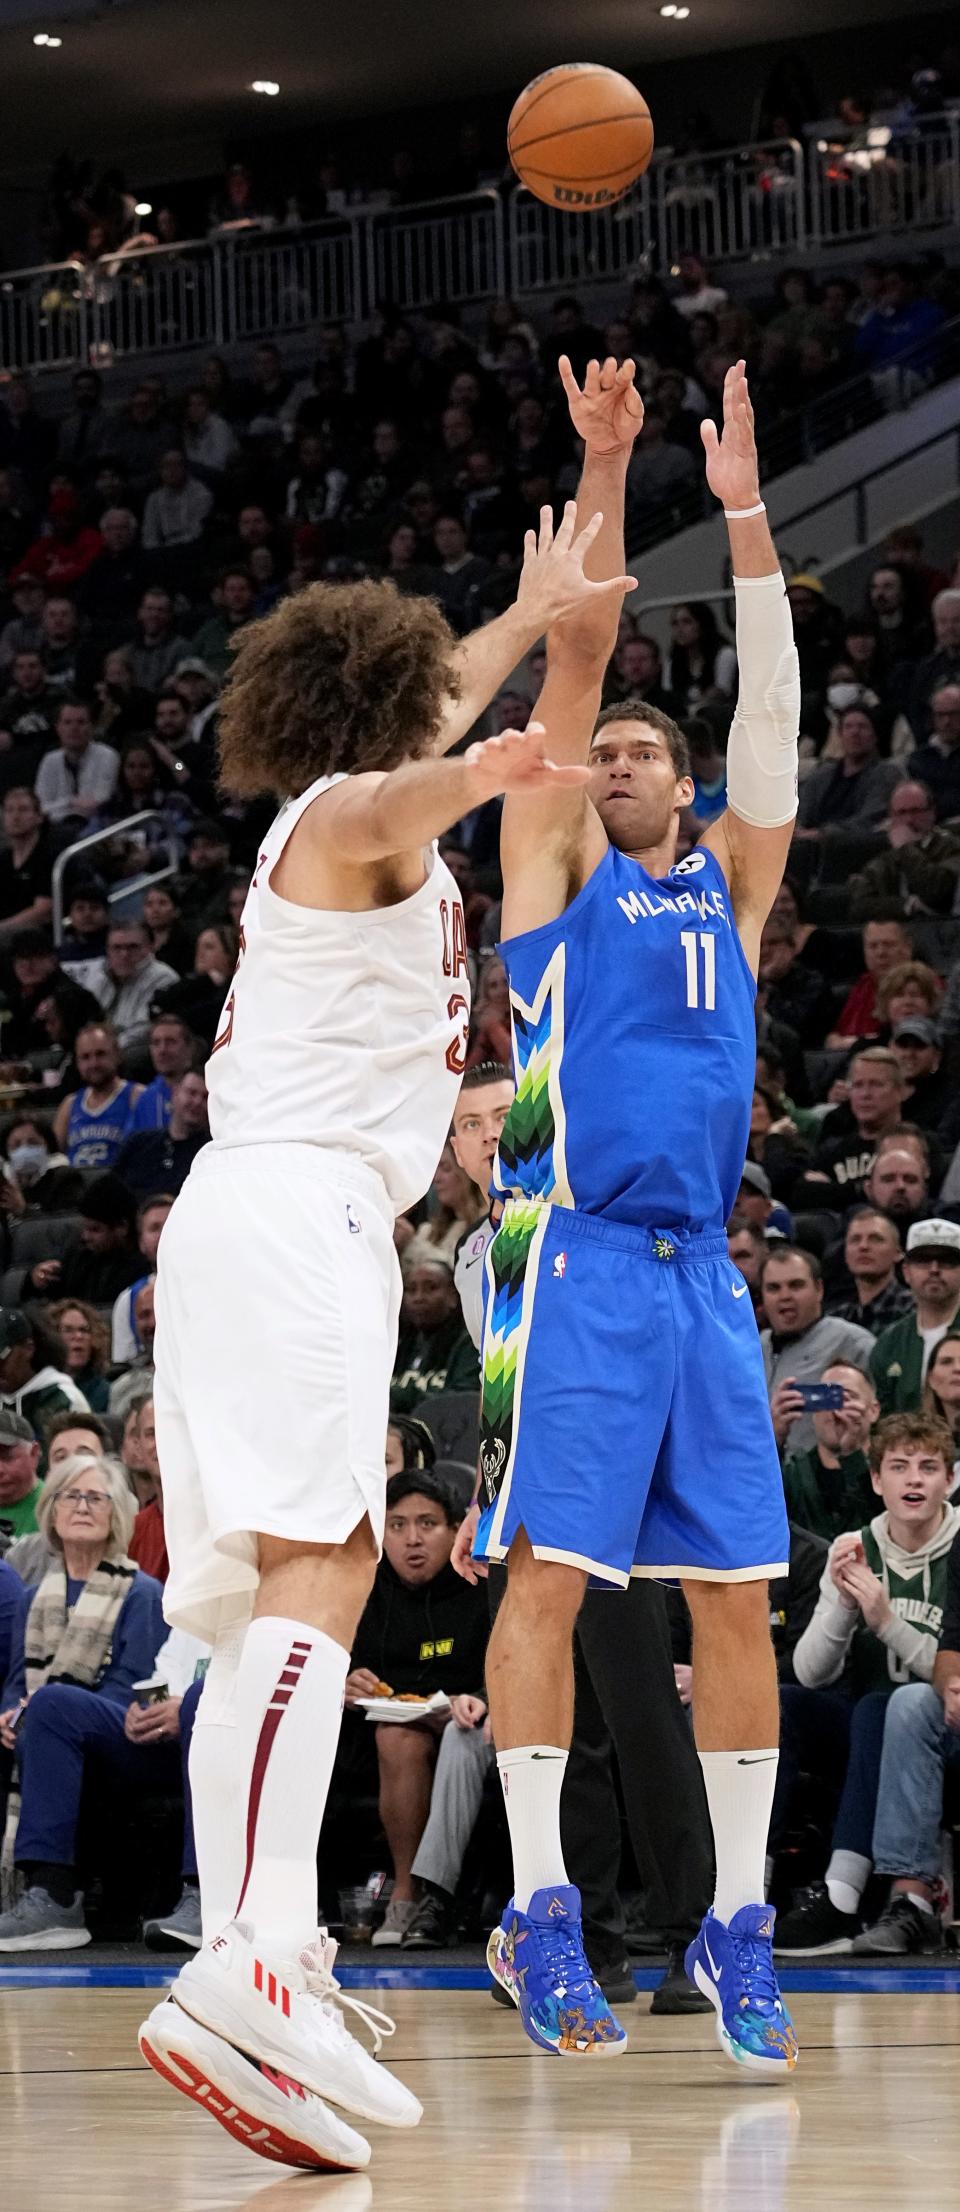 A file photo of Milwaukee Bucks center Brook Lopez (11) shooting over his brother, then Cleveland Cavaliers center Robin Lopez (33) during a game on Nov. 16, 2022 at Fiserv Forum in Milwaukee. Now, the brothers both play for the Bucks.